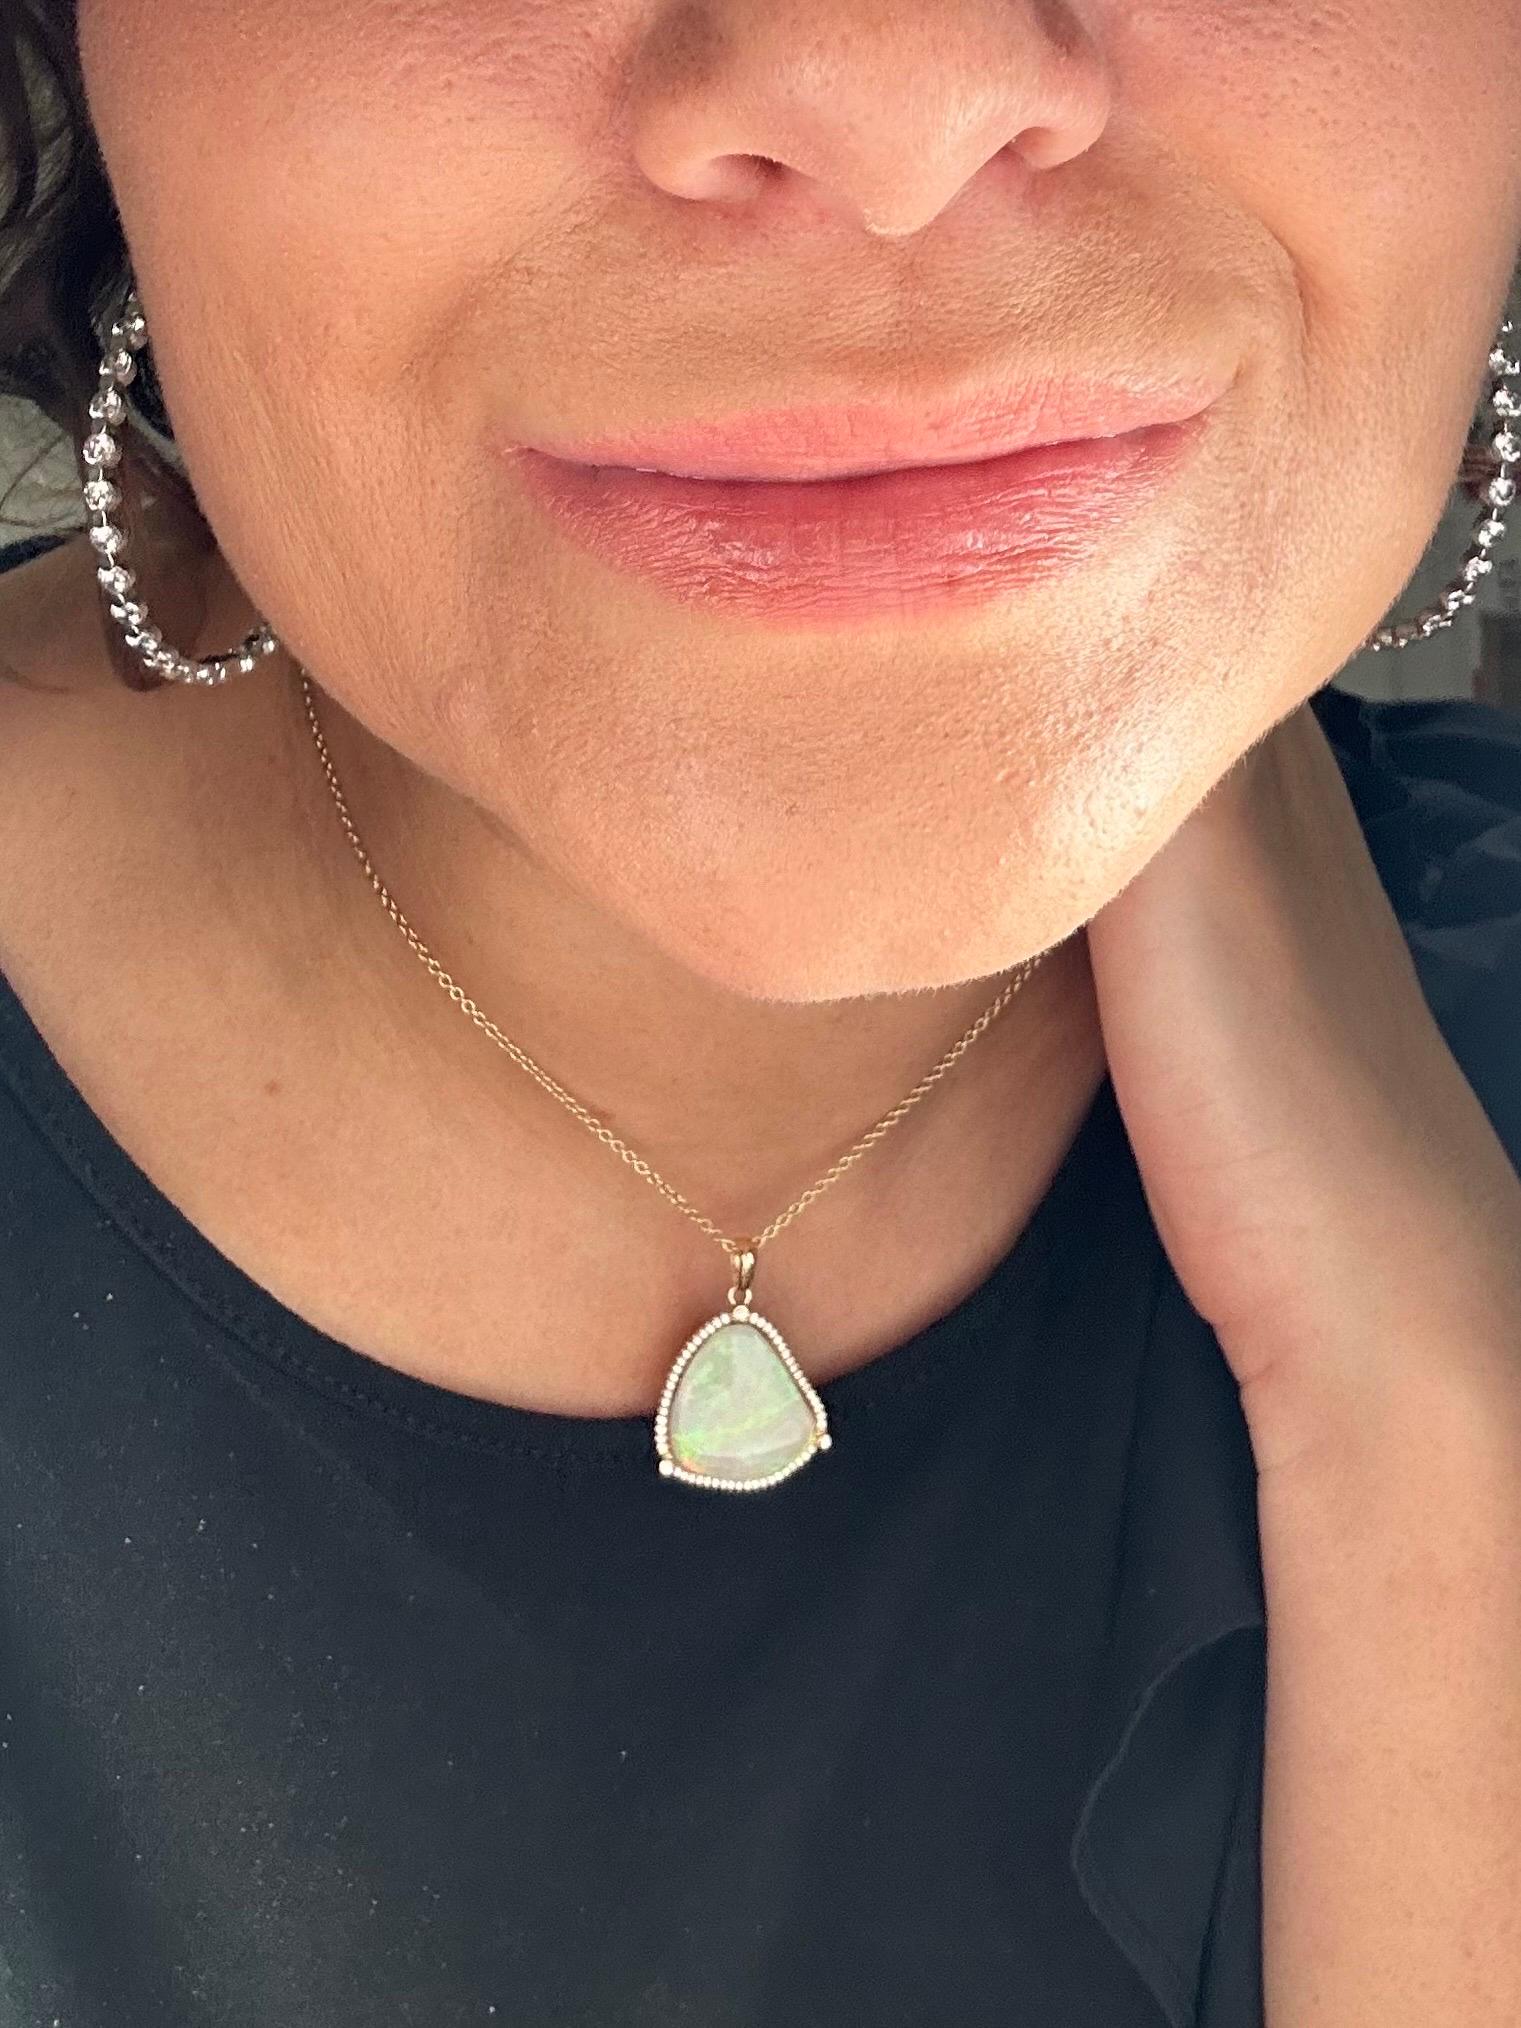 Australian opal pendant necklace with micro diamond setting in 14KT yellow gold. The pendant is made with excellent craftsmanship and fantastic design, classical with modern twist. Stunning sparkle on the opal and a fancy ball chain.

GOLD: 14KT